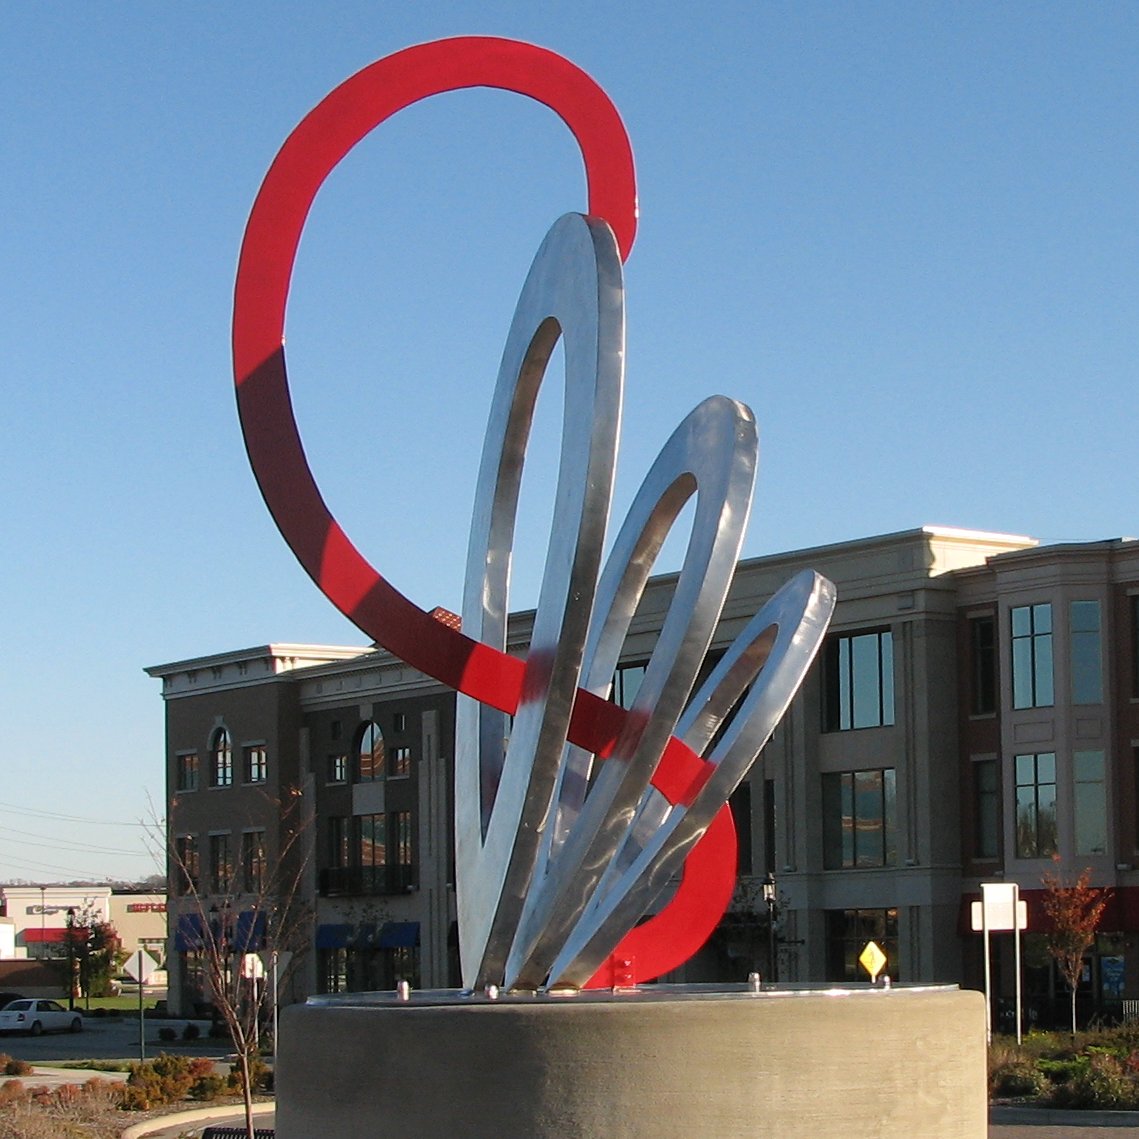 Happy International Sculpture Day #ISDay! See how the 𝙏𝙝𝙚 𝘾𝙤𝙢𝙢𝙪𝙣𝙞𝙩𝙮 𝘾𝙝𝙖𝙞𝙣 by artist Pattie Byron was designed and created for The Square @ Union Centre in 2009 vimeo.com/10205402 #WestChesterOH #BestPlacestoLive